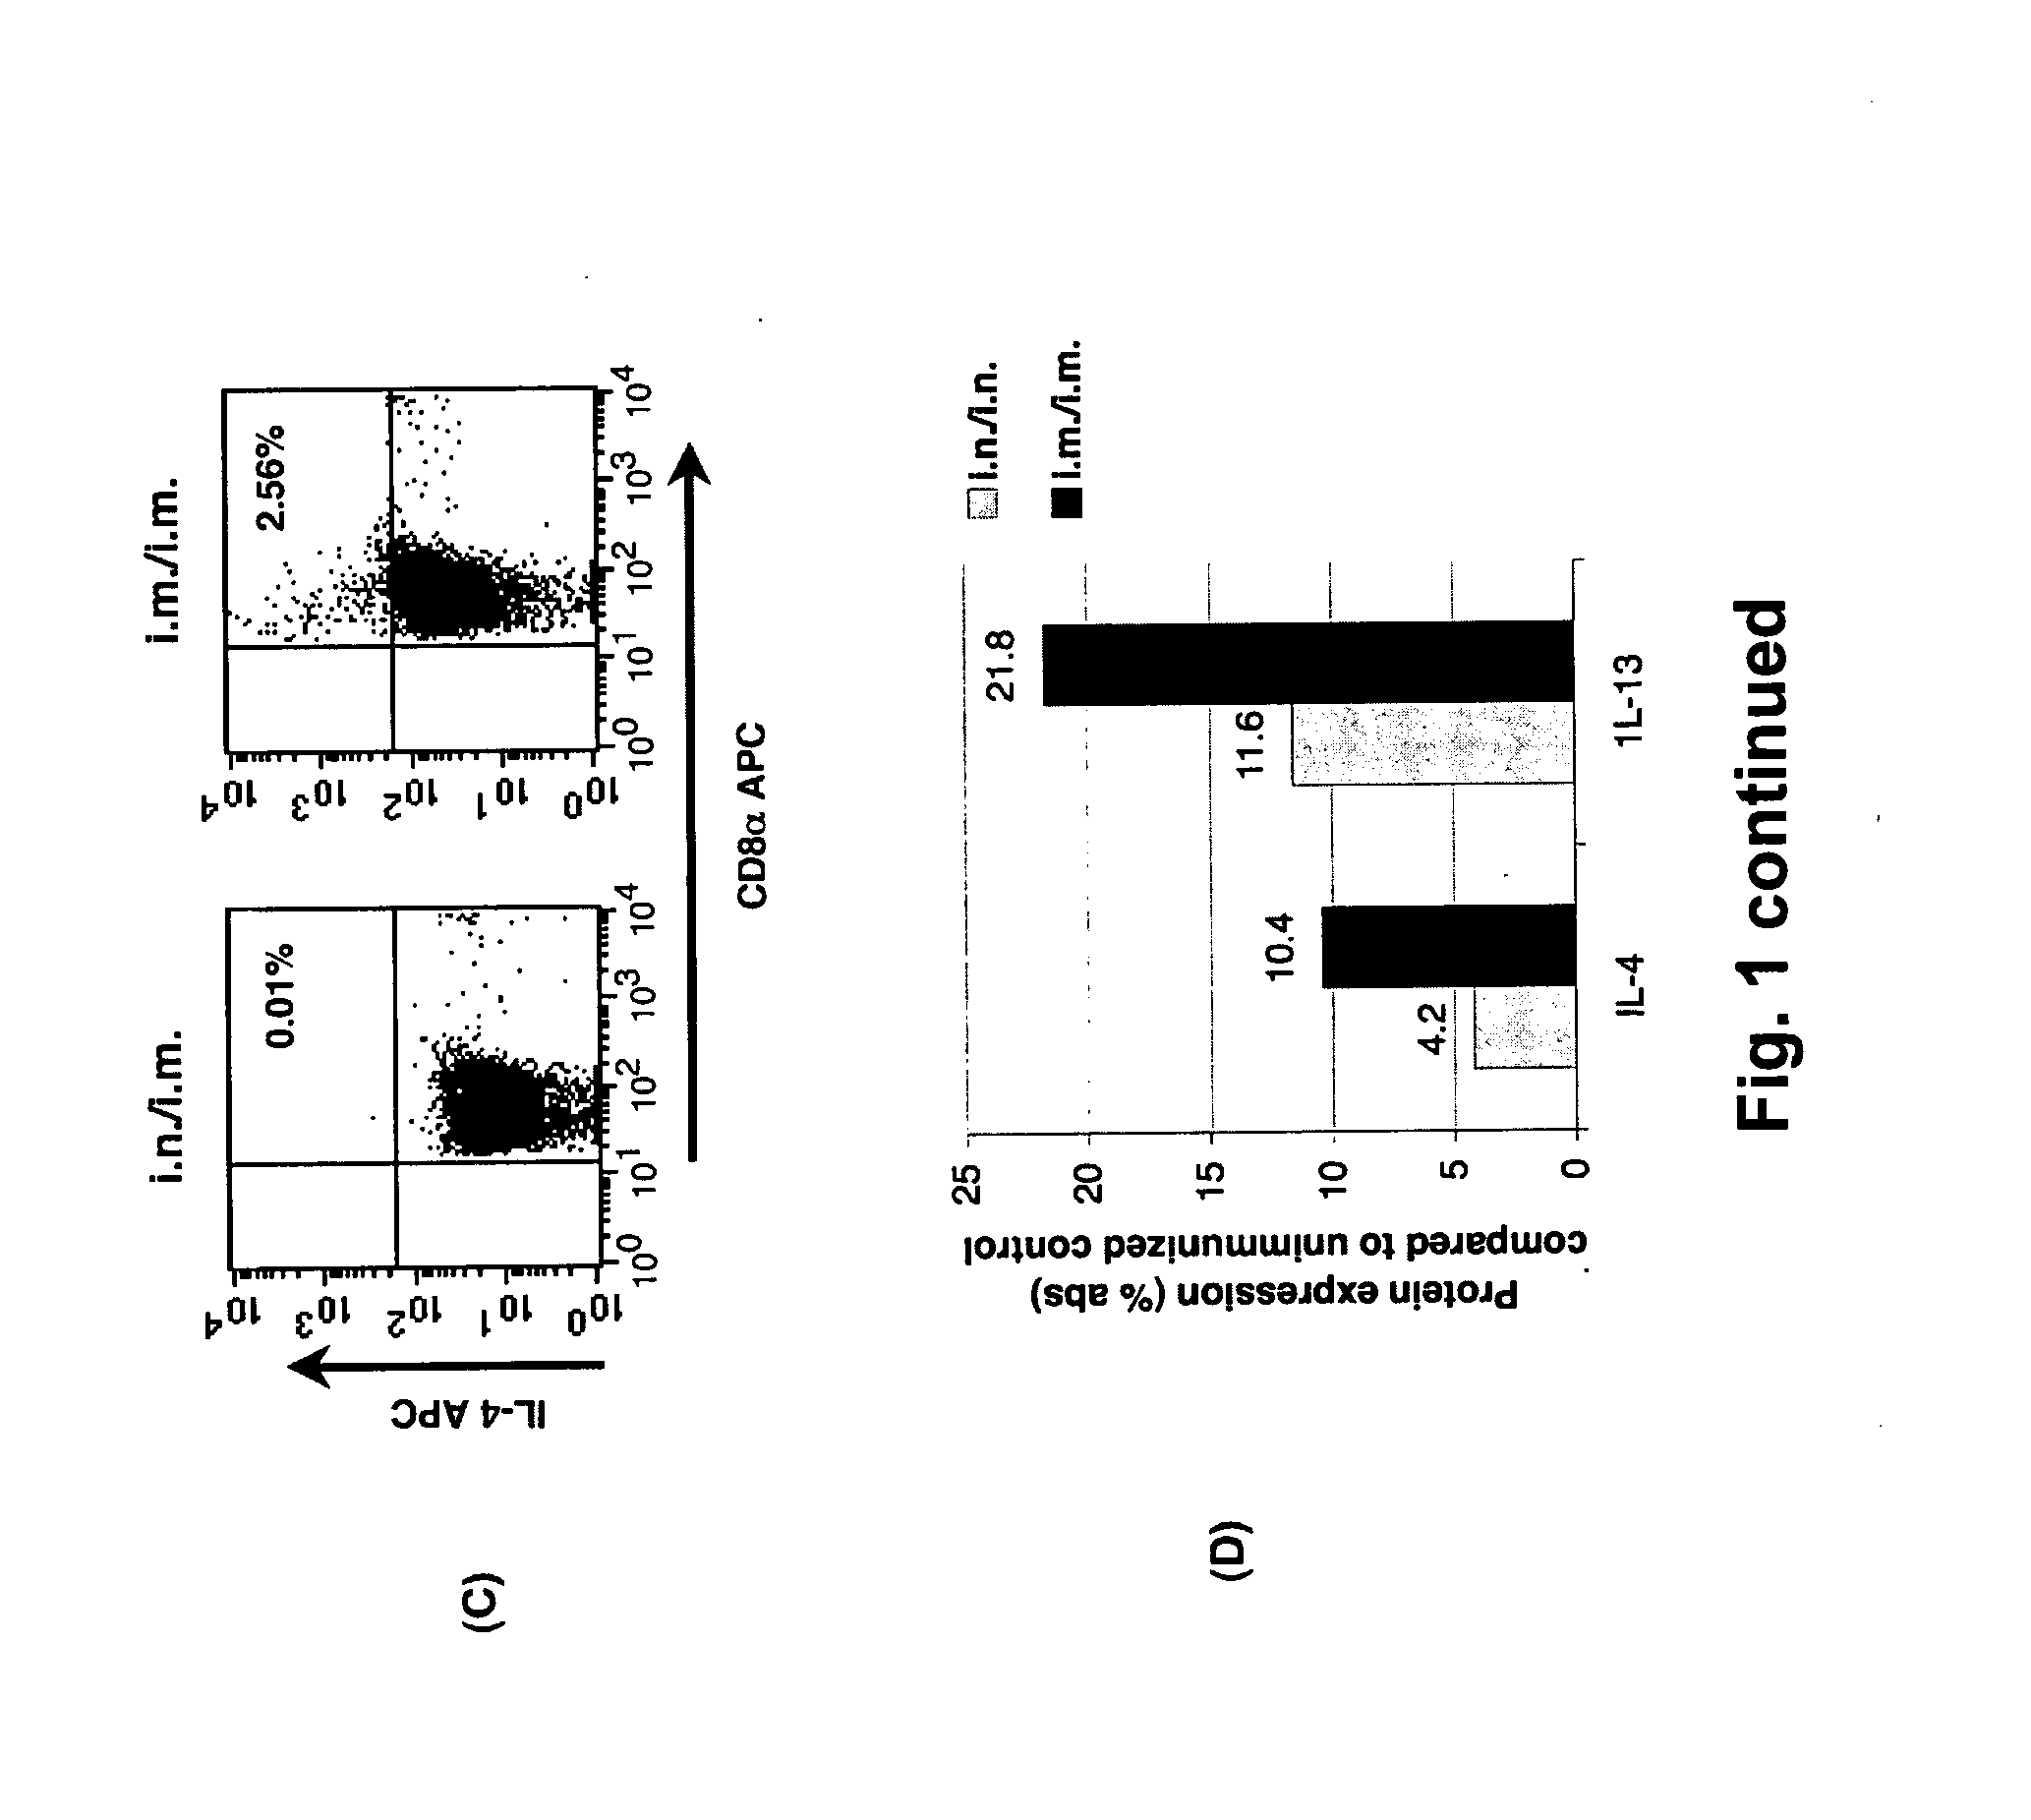 Immunomodulating compositions comprising interleukin 13 inhibitors and uses therefor